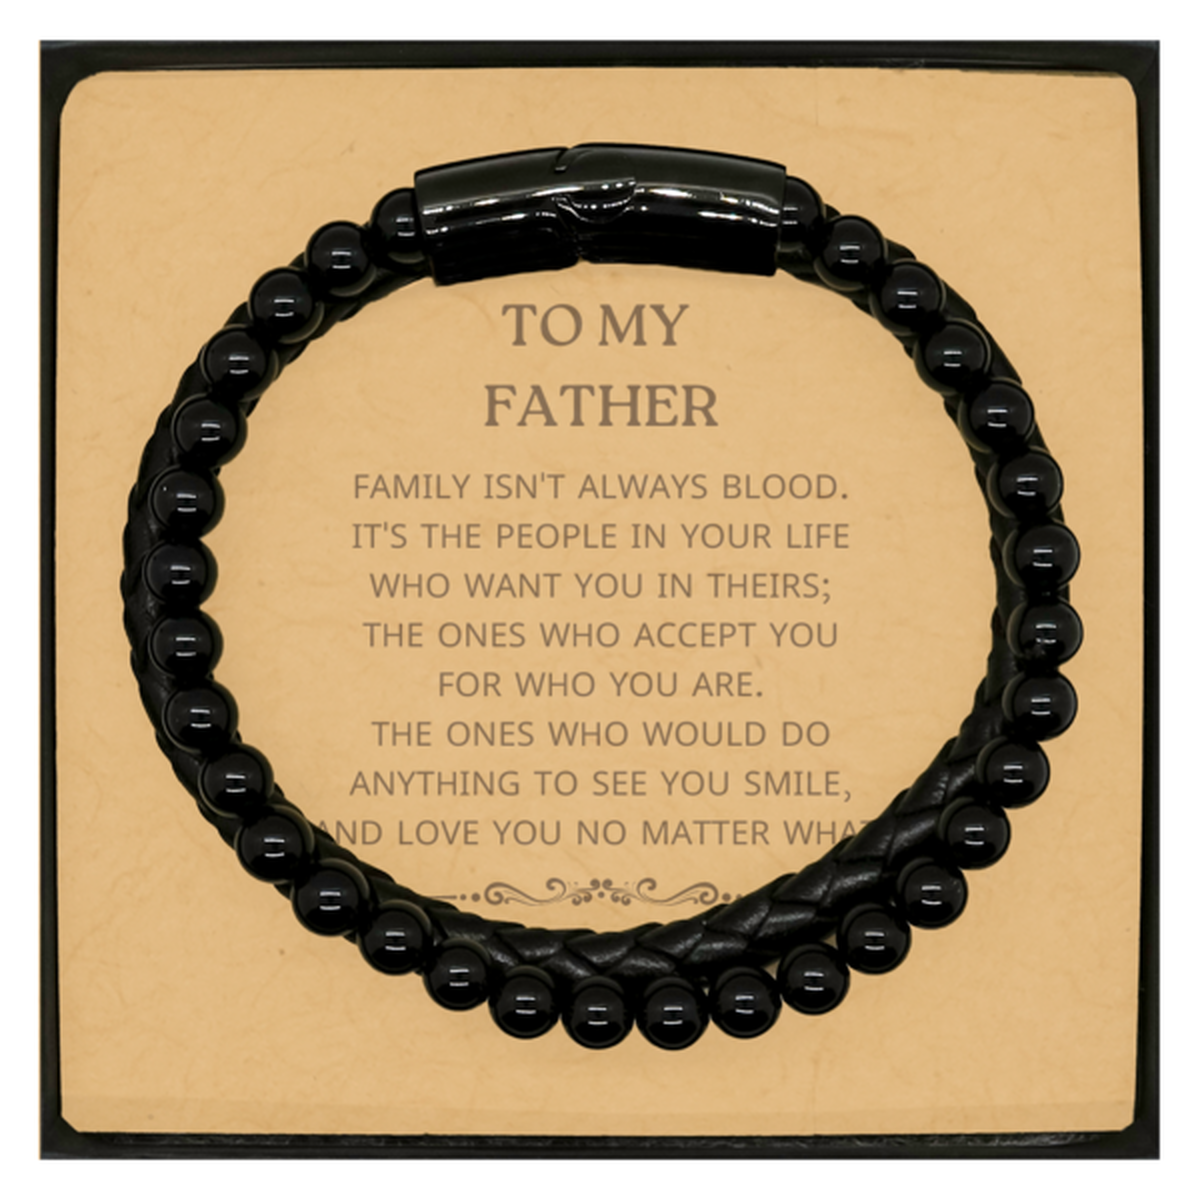 To My Father Gifts, Family isn't always blood, Father Stone Leather Bracelets, Birthday Christmas Unique Present For Father